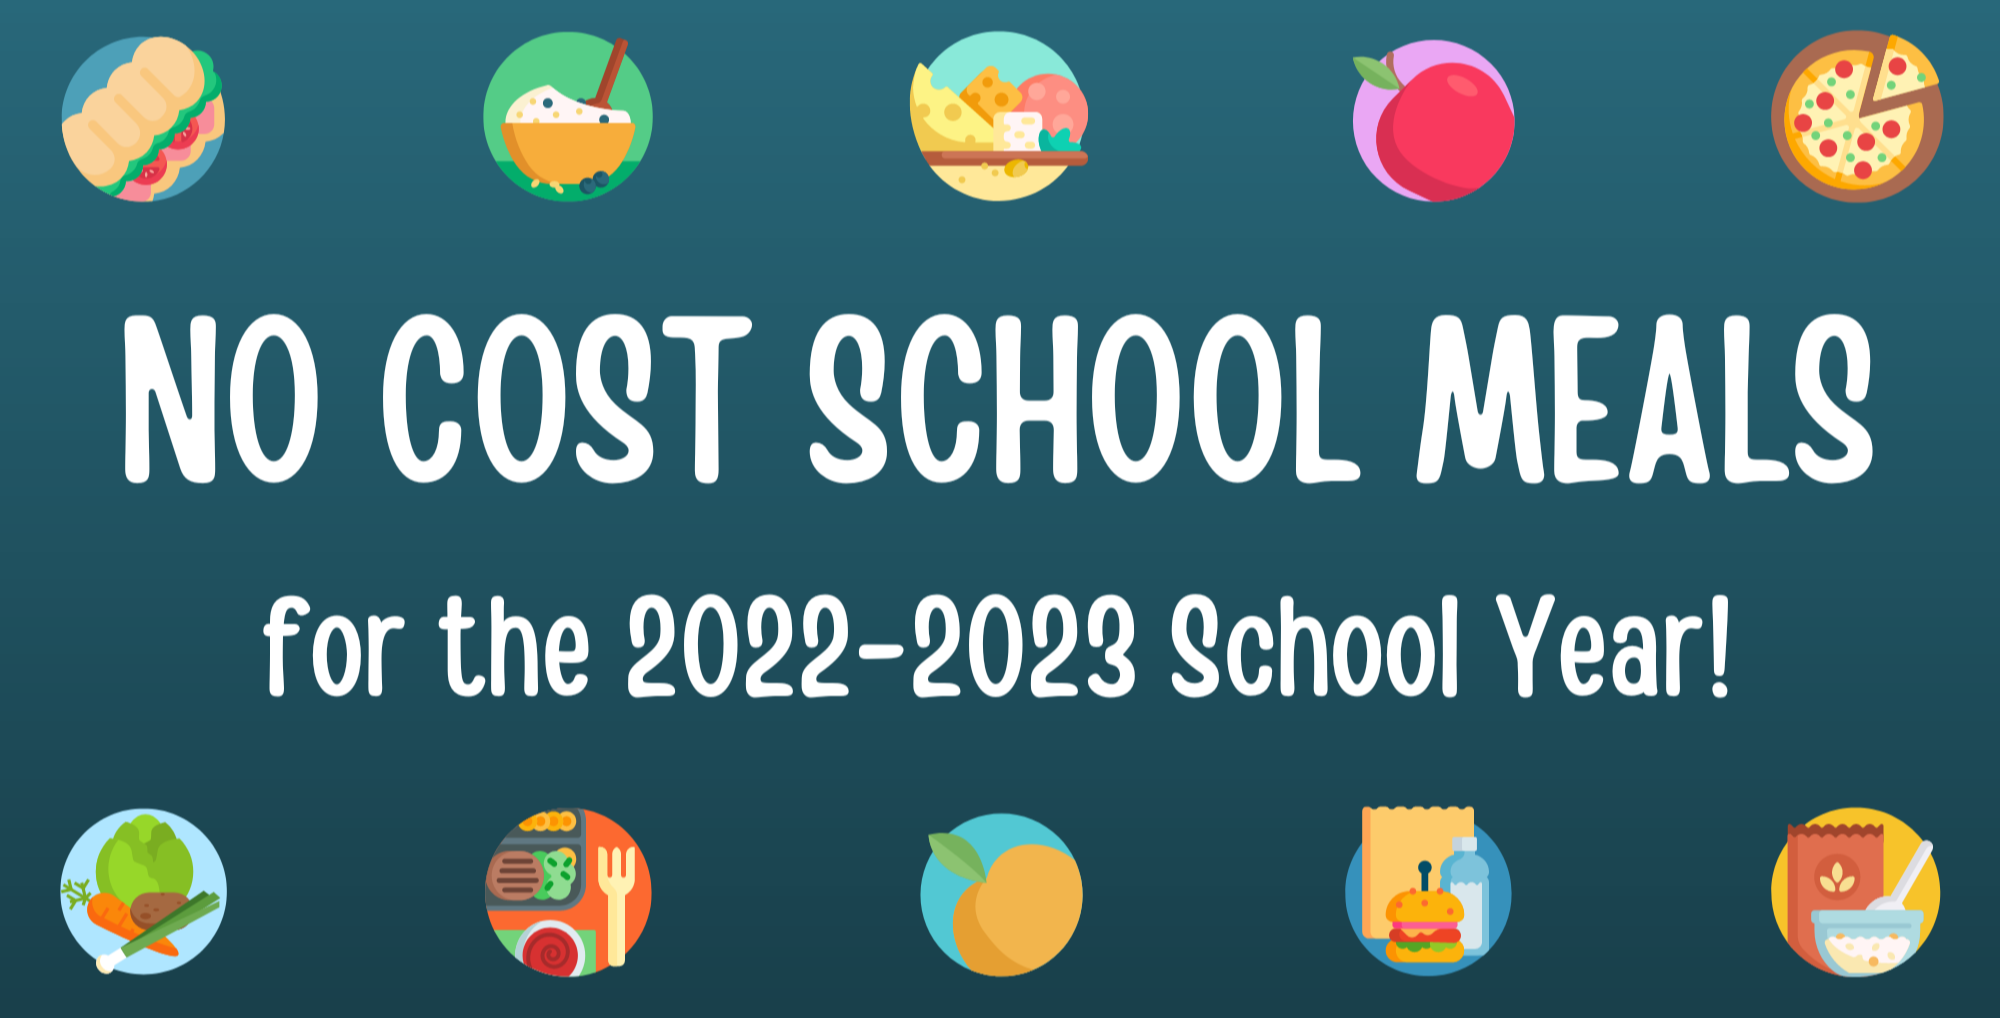 No Cost School Meals for 2022-23, Food Icons, Vegetables, Fruit, Yogurt, Sandwich, Pizza, Cereal, Meat and Cheese